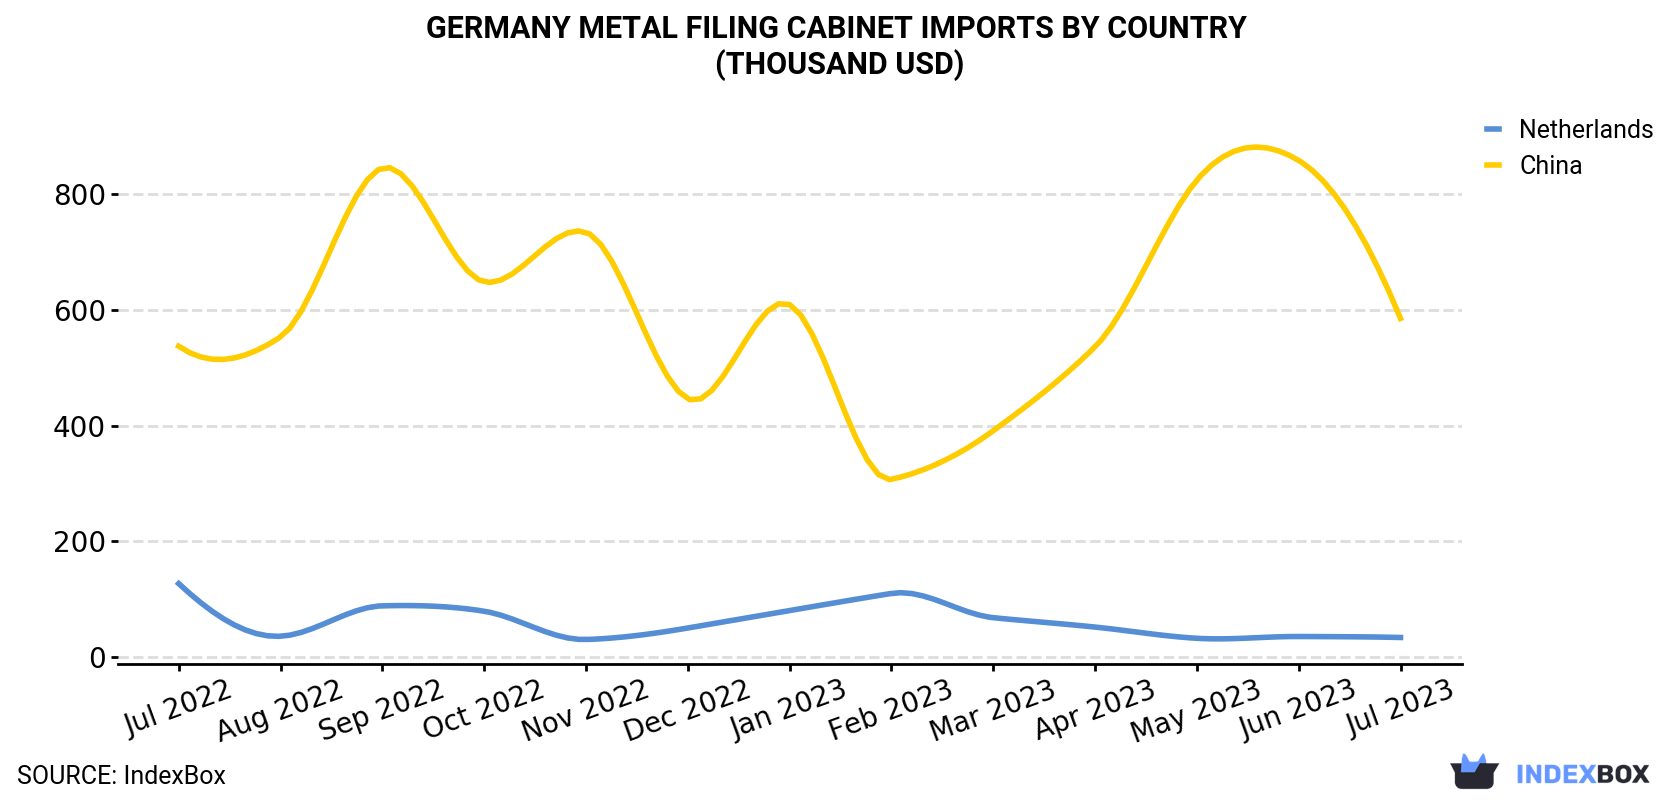 Germany Metal Filing Cabinet Imports By Country (Thousand USD)